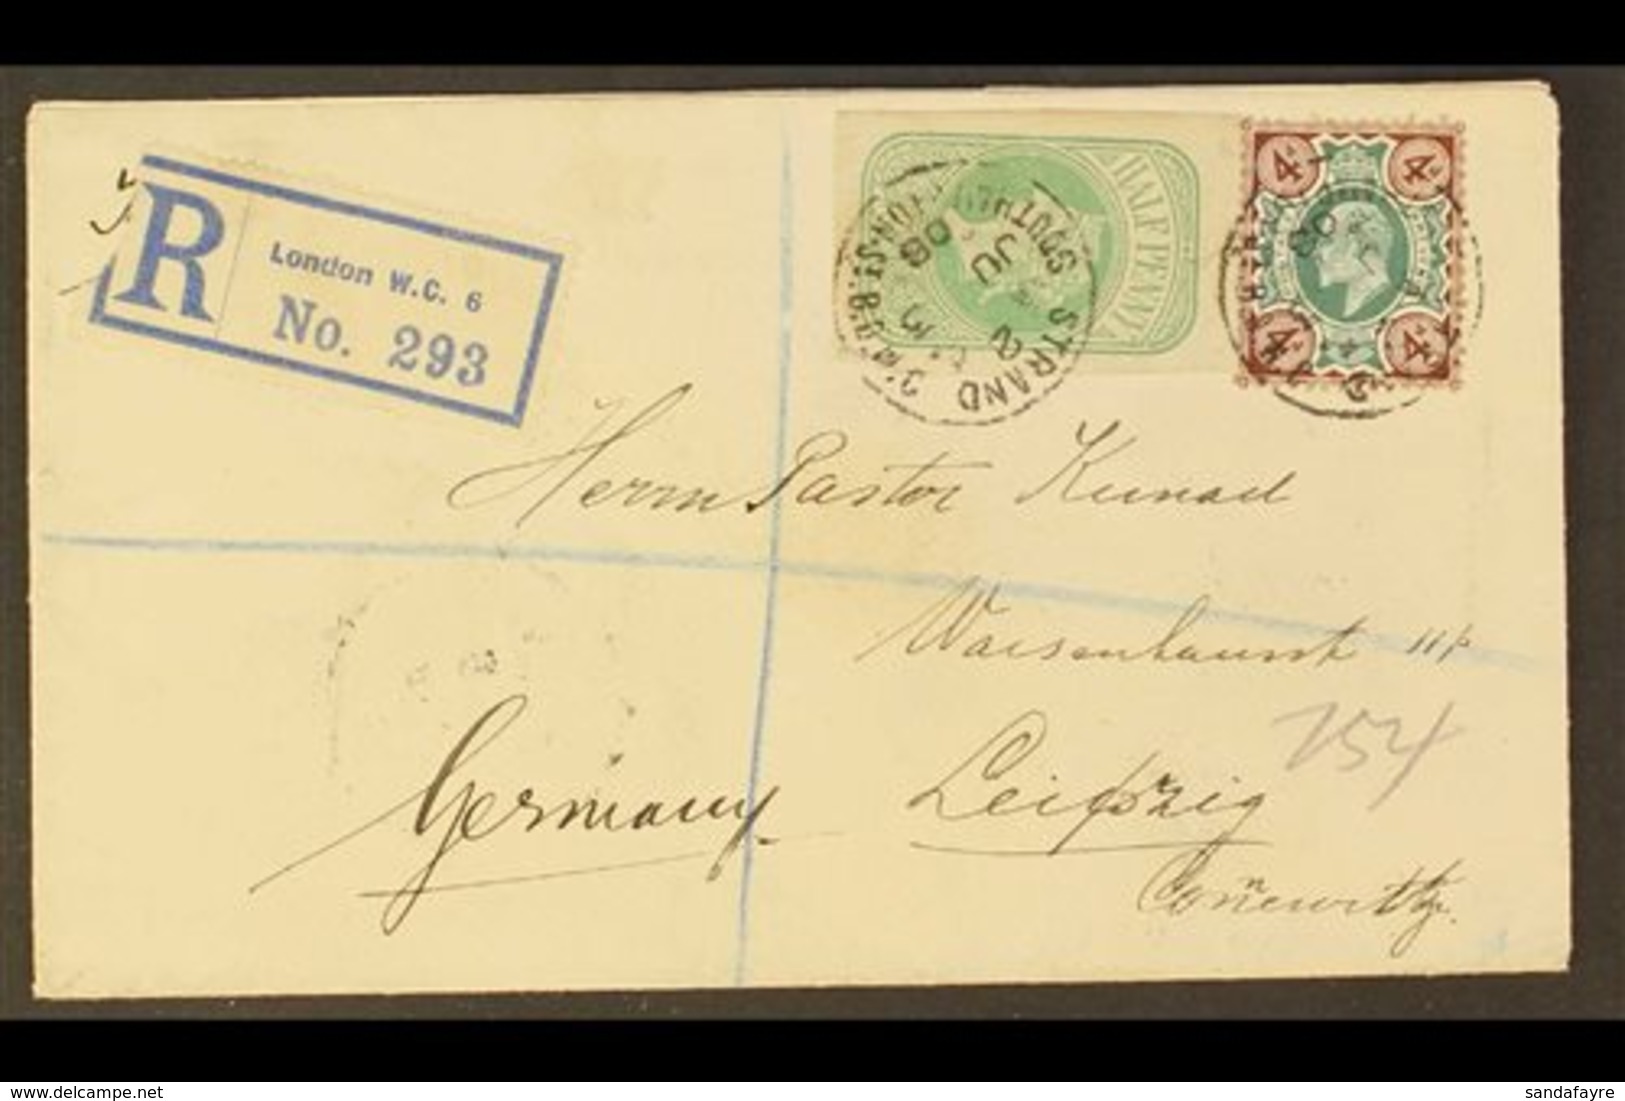 1908 (3 June) Registered Cover Addressed To Germany, Bearing 4d KEVII Stamp And ½d QV Postal Stationery Wrapper Cut-out, - Unclassified